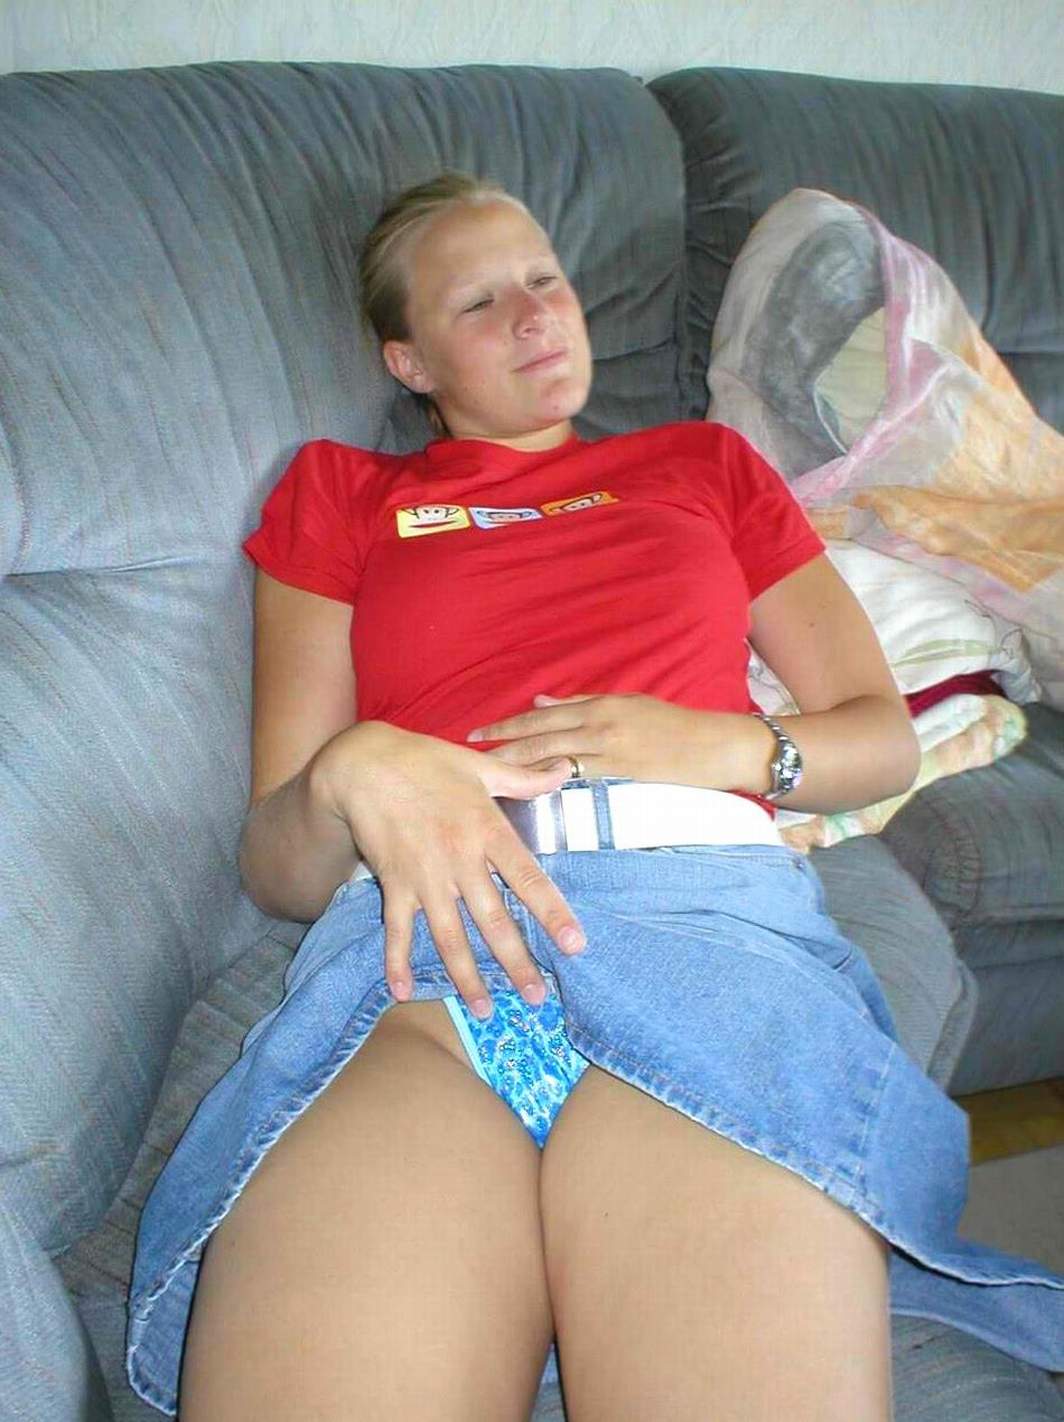 Amateur homemade Porn very hot archive FREE pic